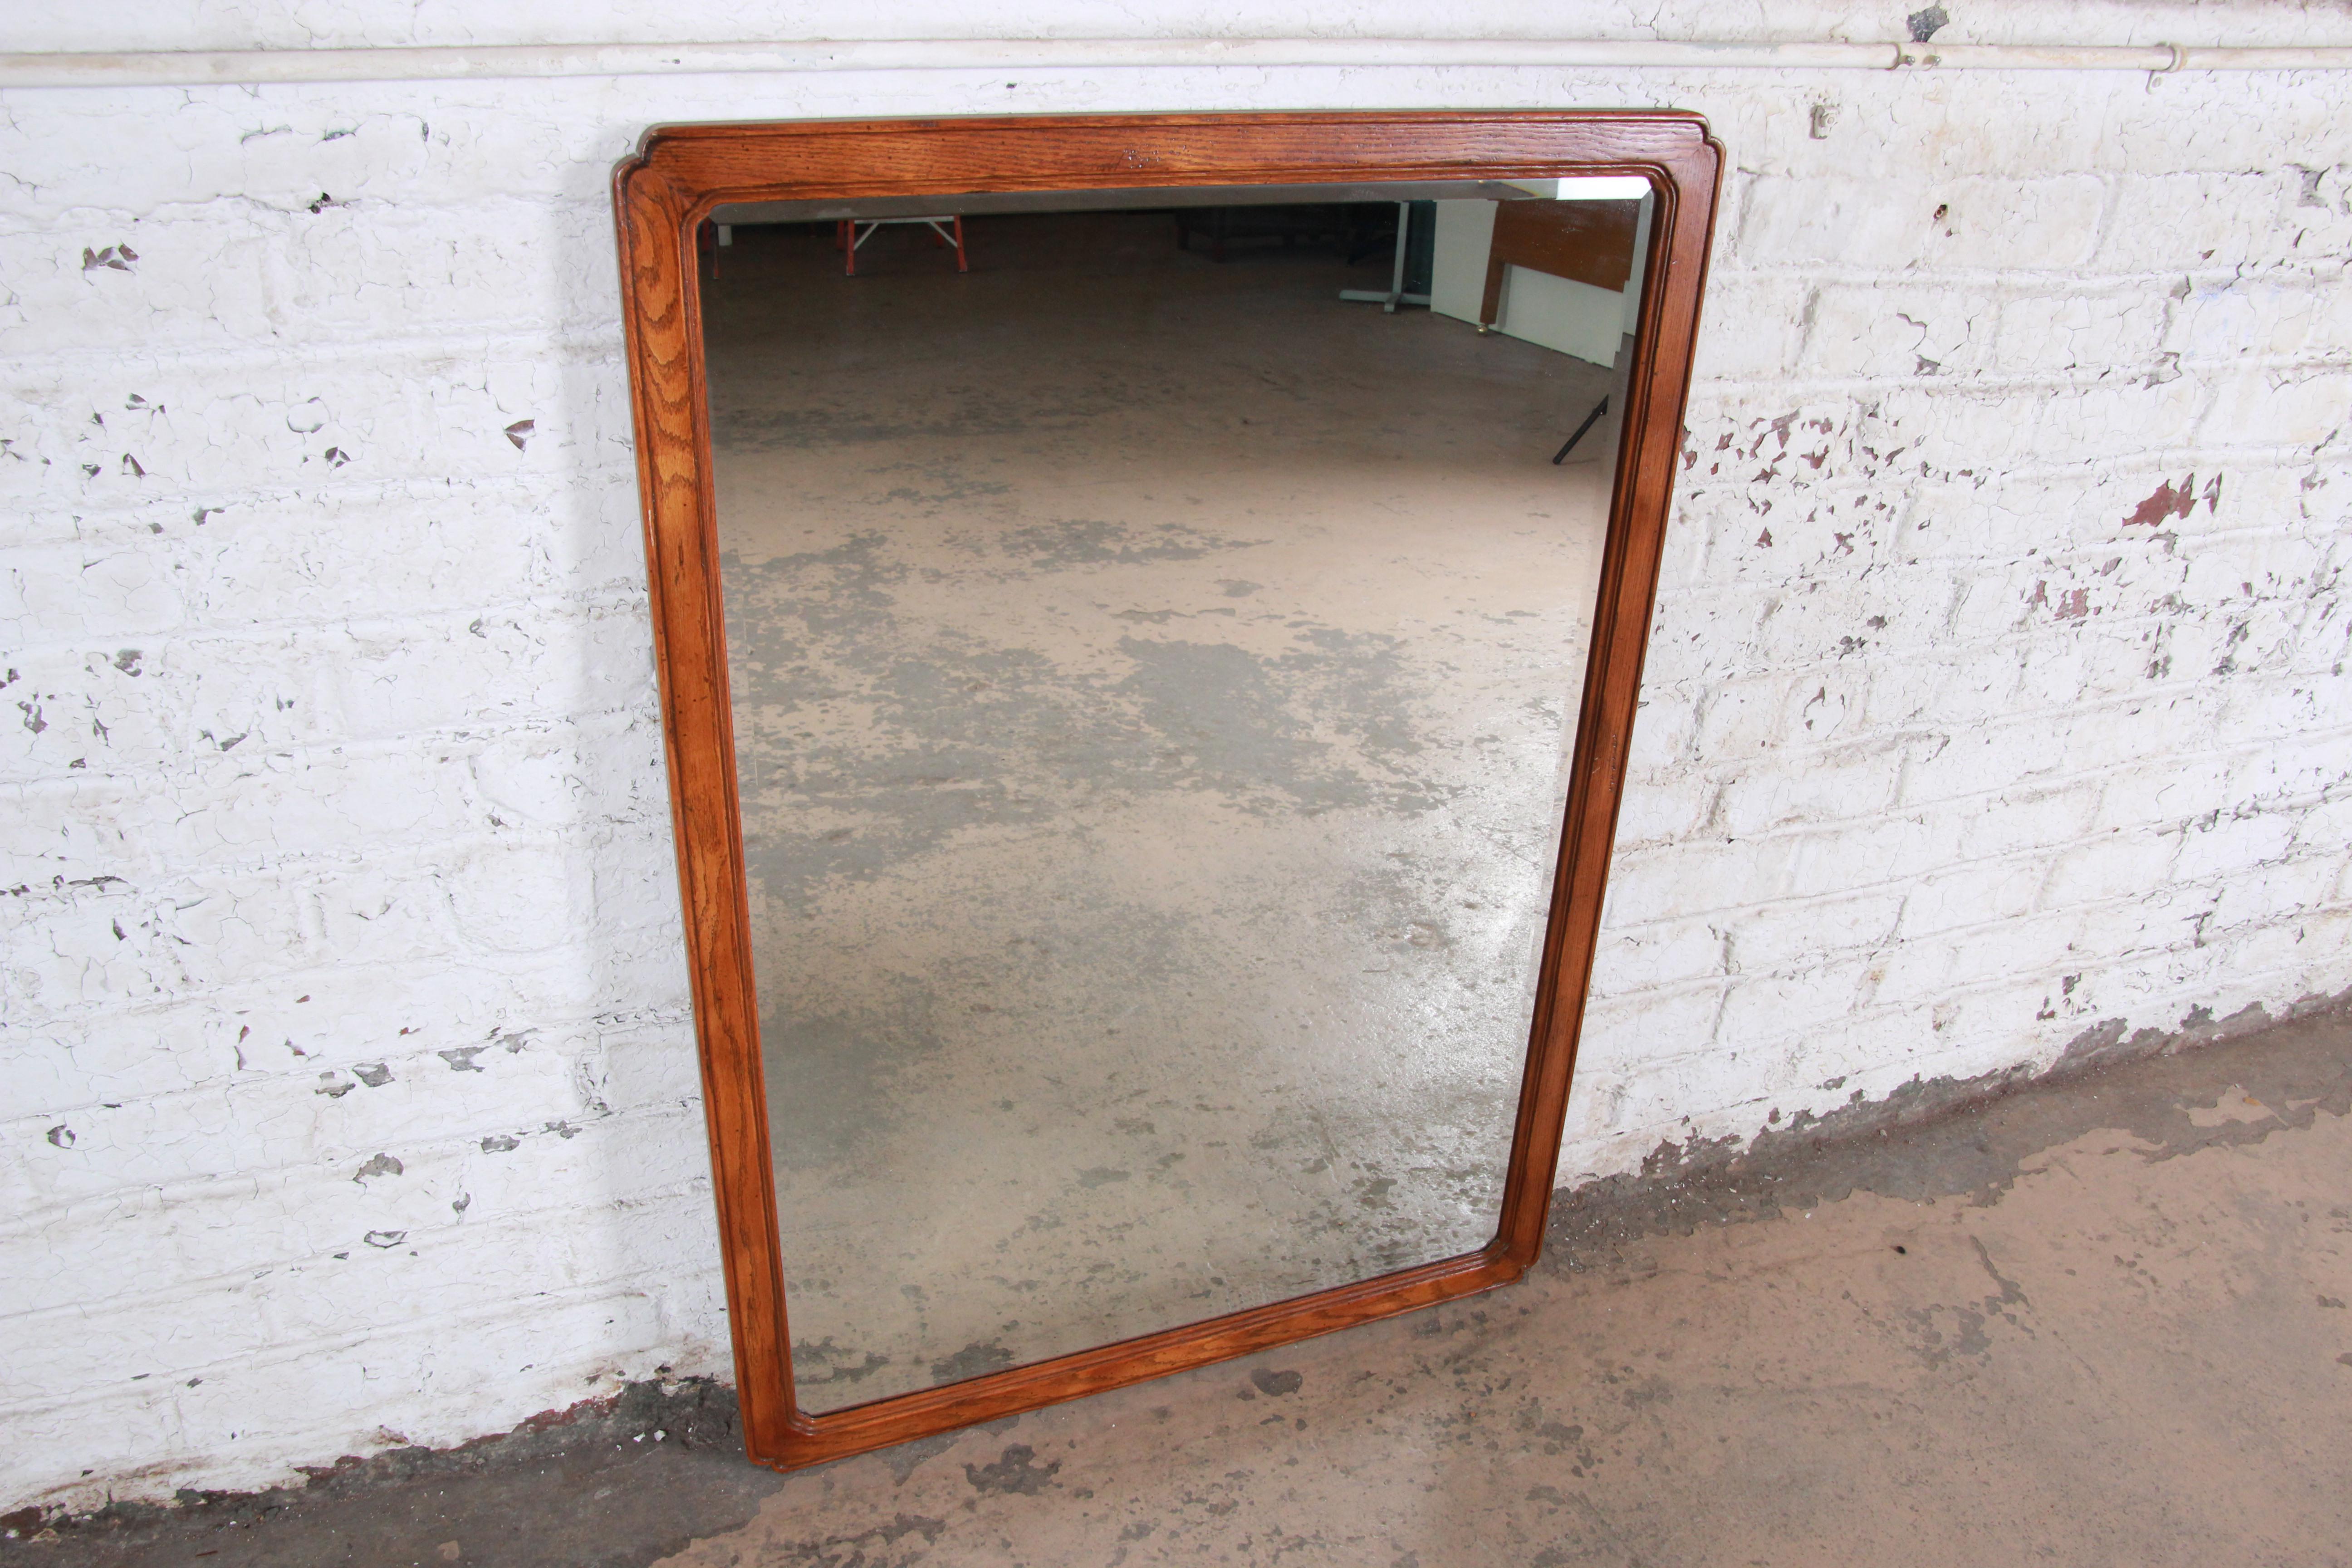 A nice oak beveled mirror by Henredon. The mirror has a clear reflection and nice oak frame. The frame has nice rounded edges and is in excellent vintage condition.